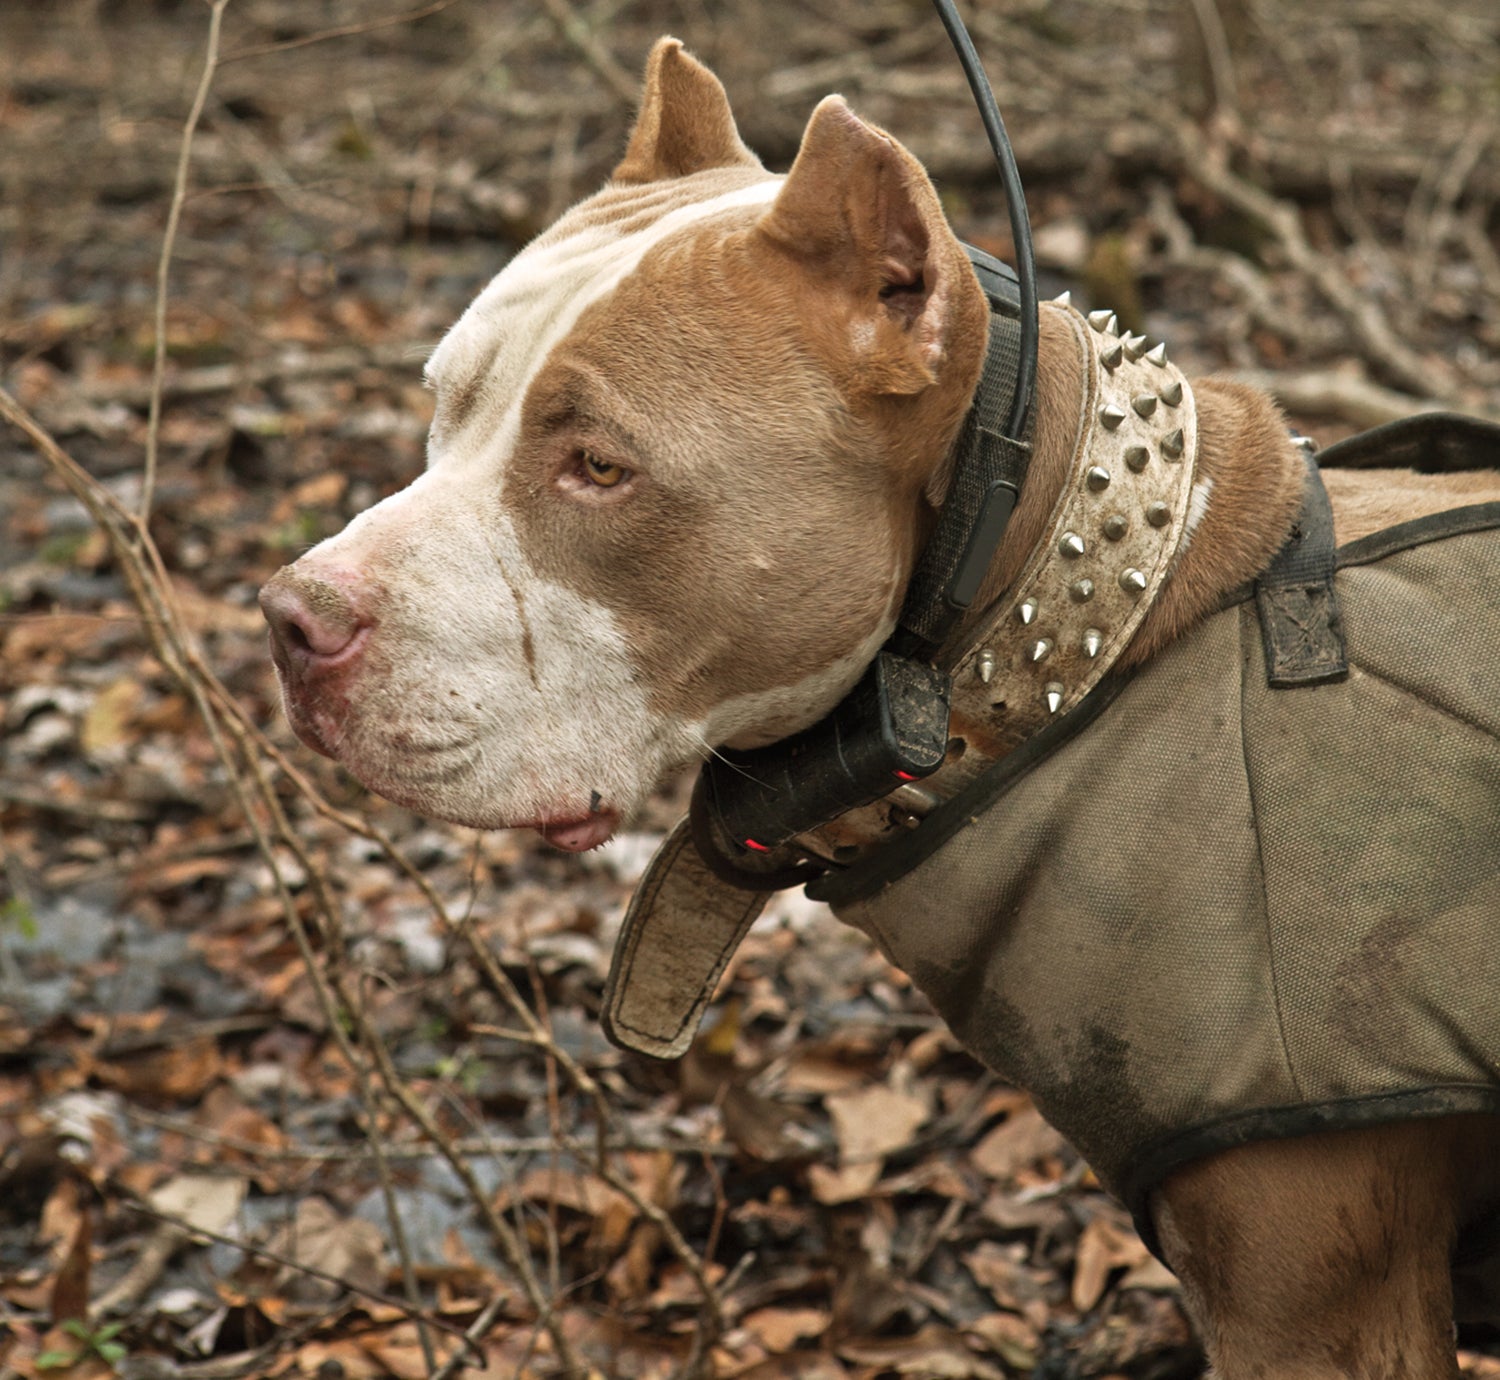 pitbull in profile, wearing spiked collar and radio collar, plus vest